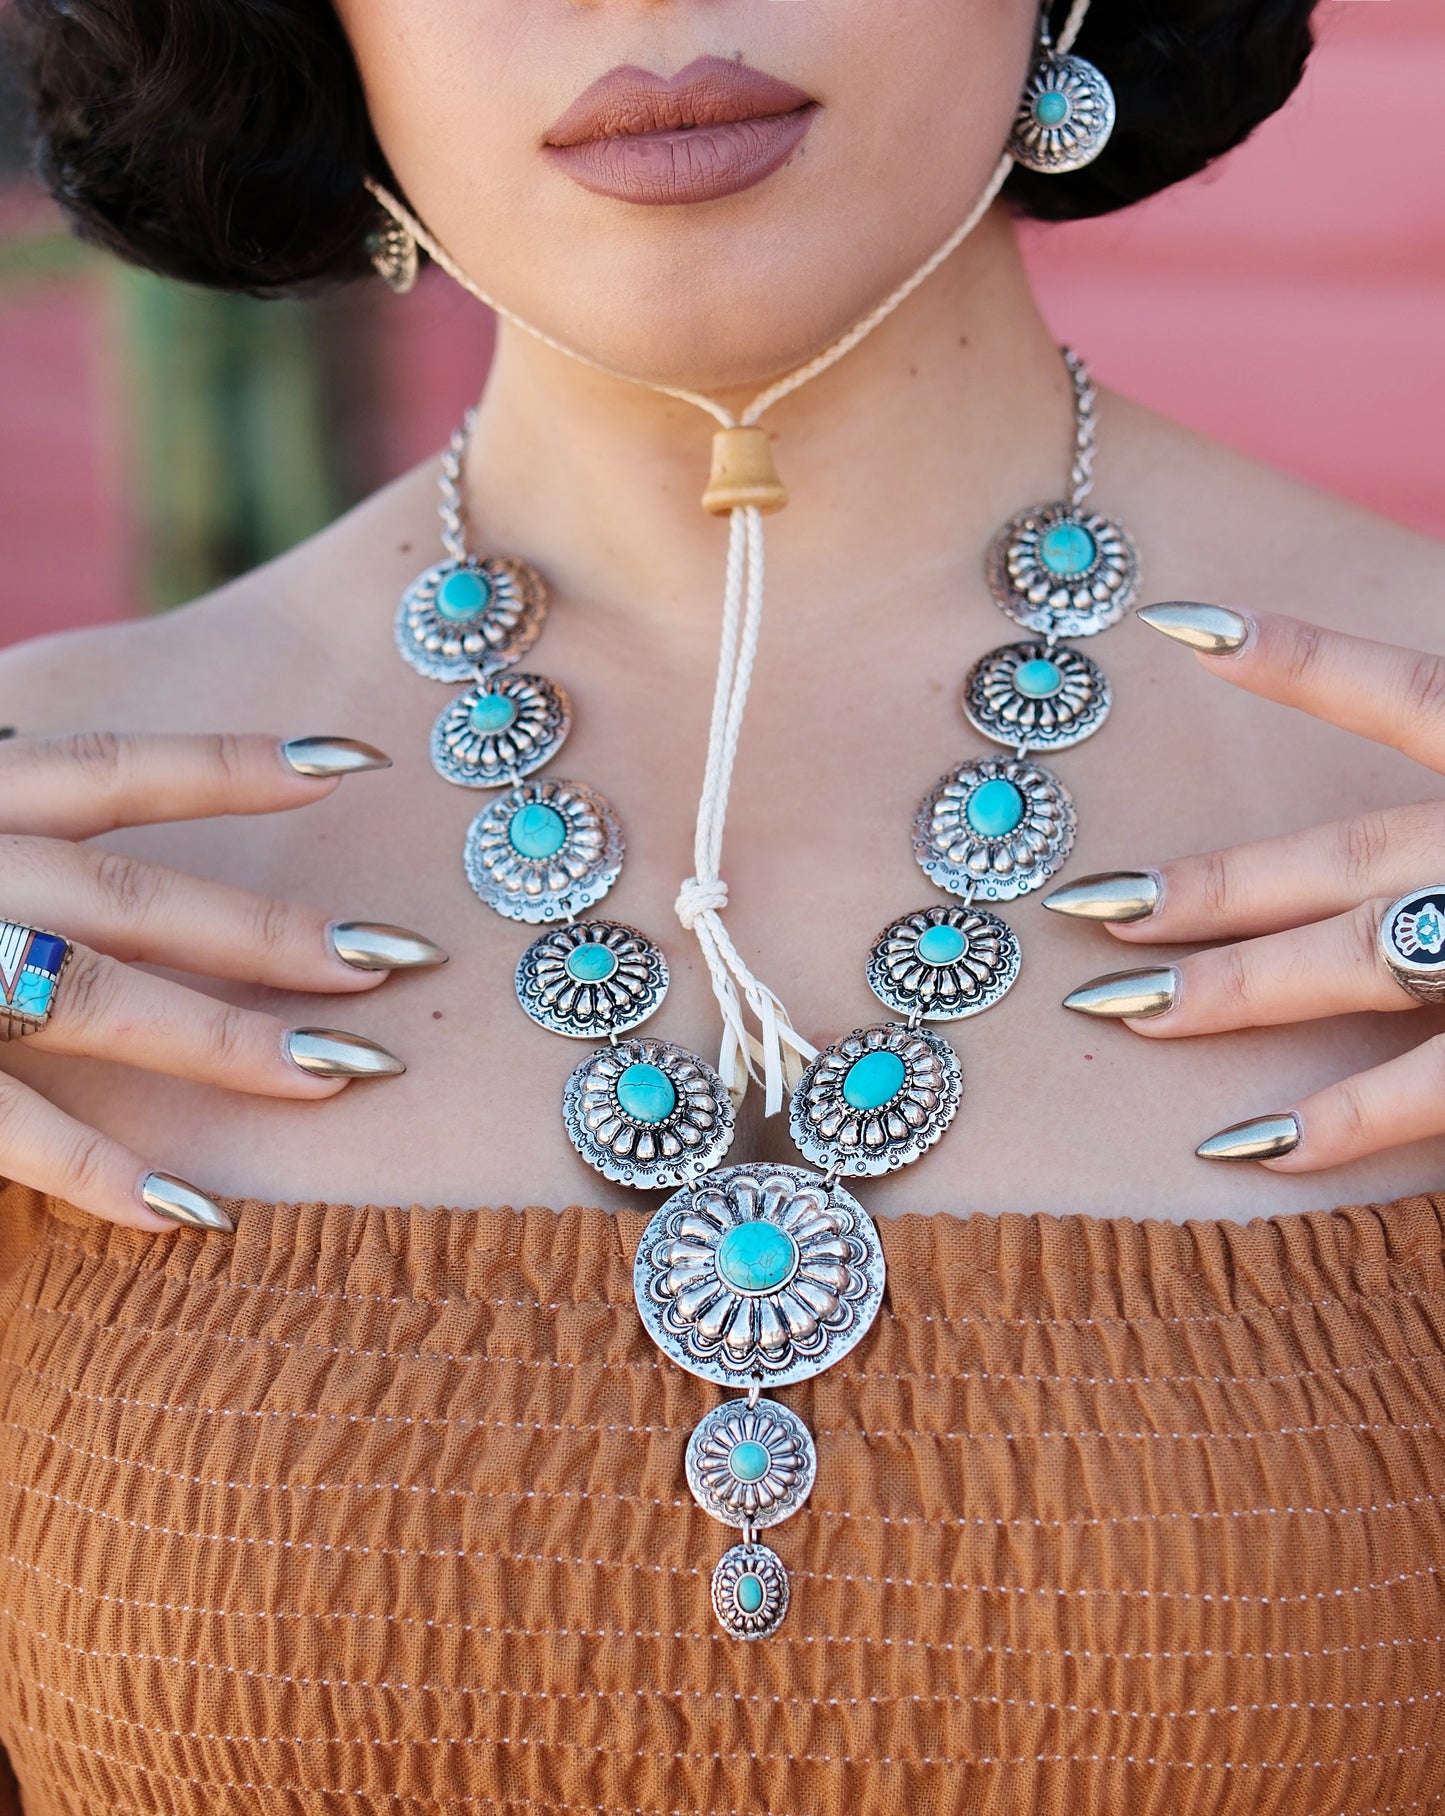 Western Concho Lariat Necklace + Earrings Set